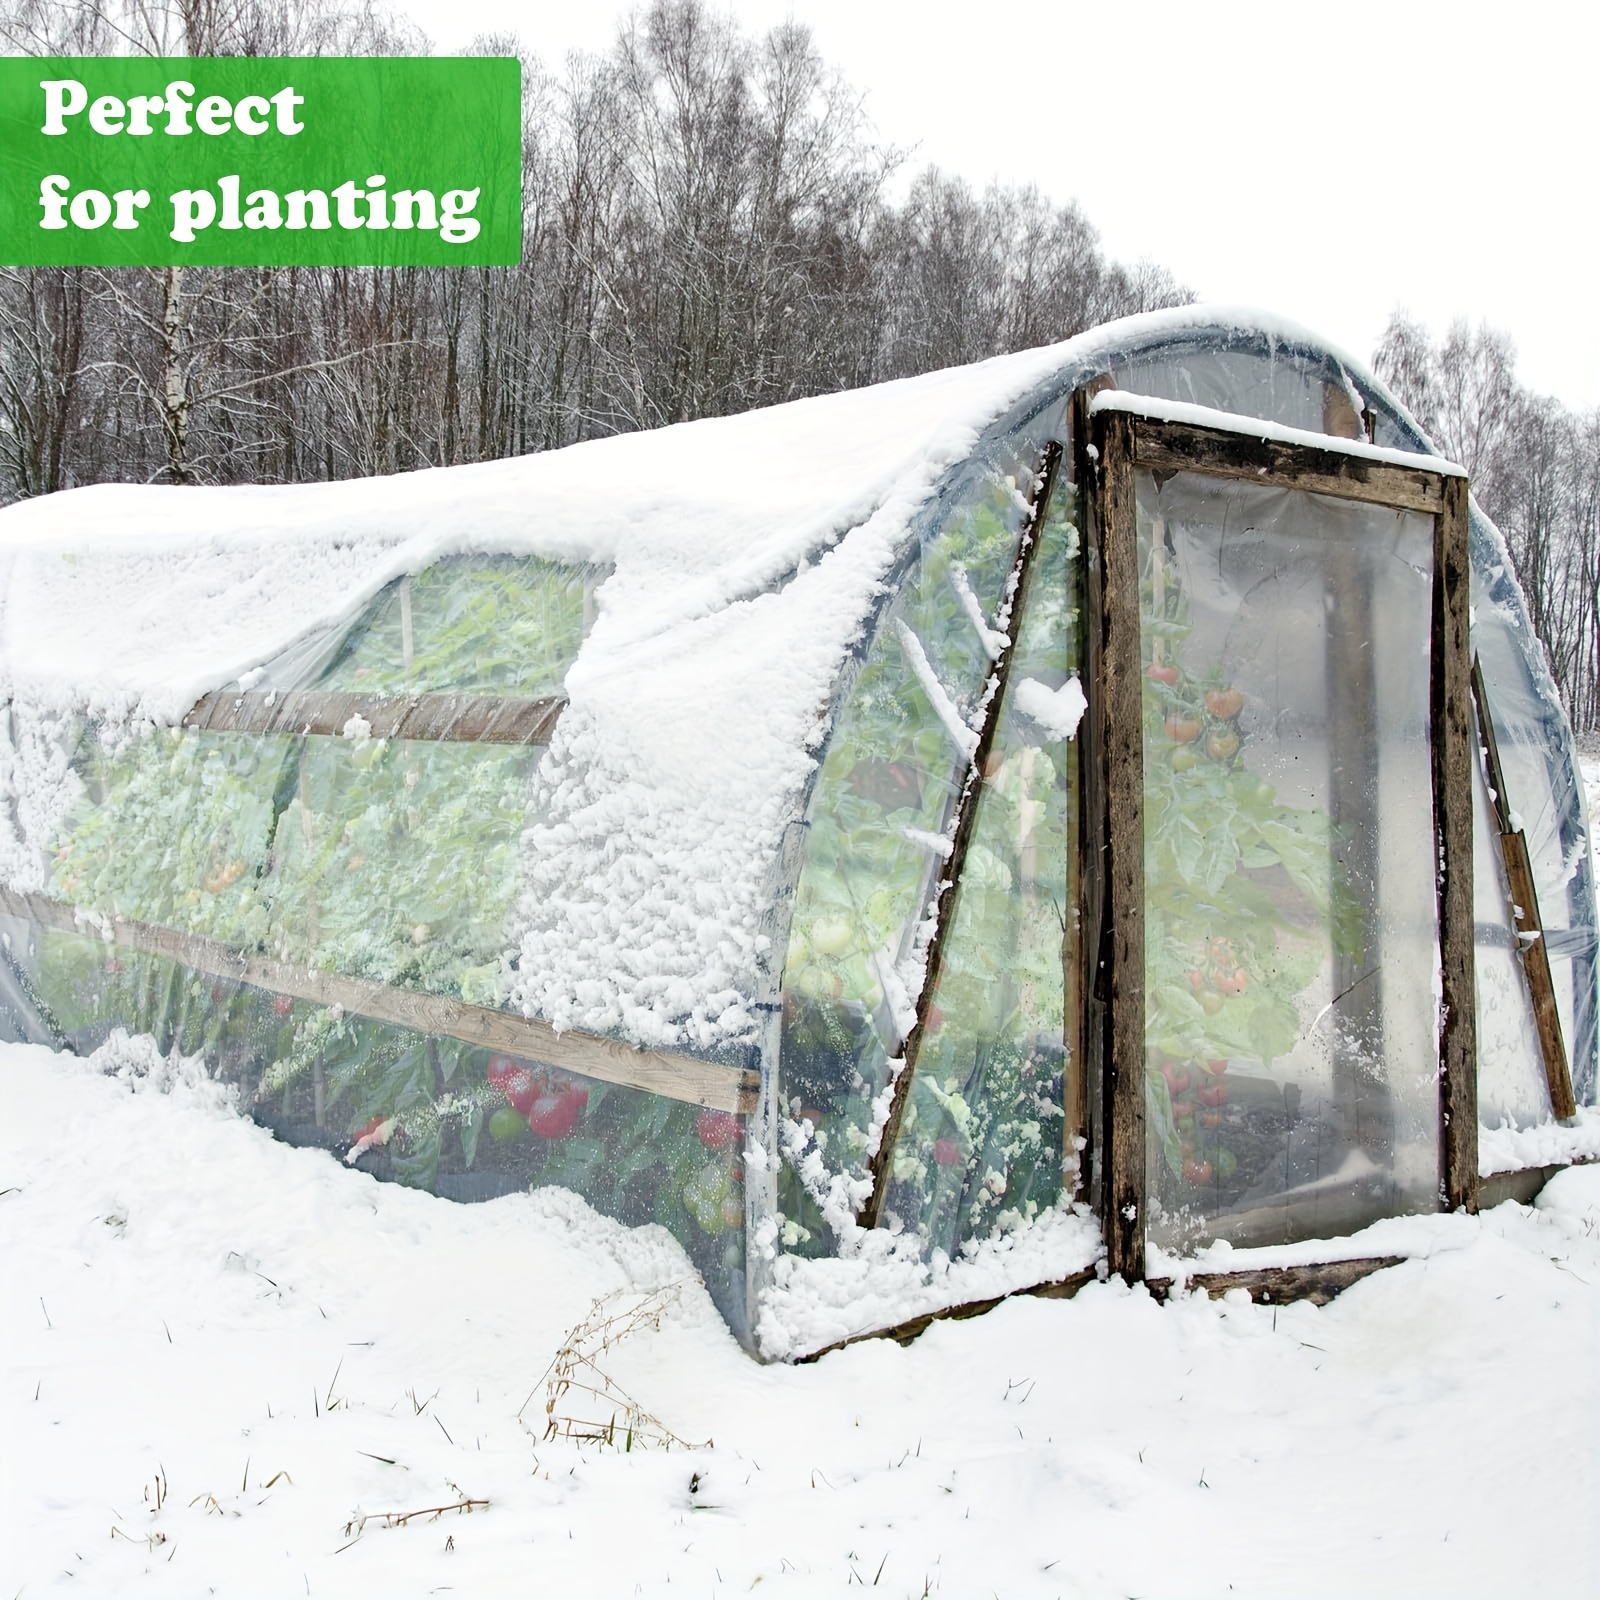 1pc clear greenhouse plastic film polyethylene sheeting cover greenhouse garden plant cover sheeting freeze frost protection uv resistant for gardening farming agriculture etc